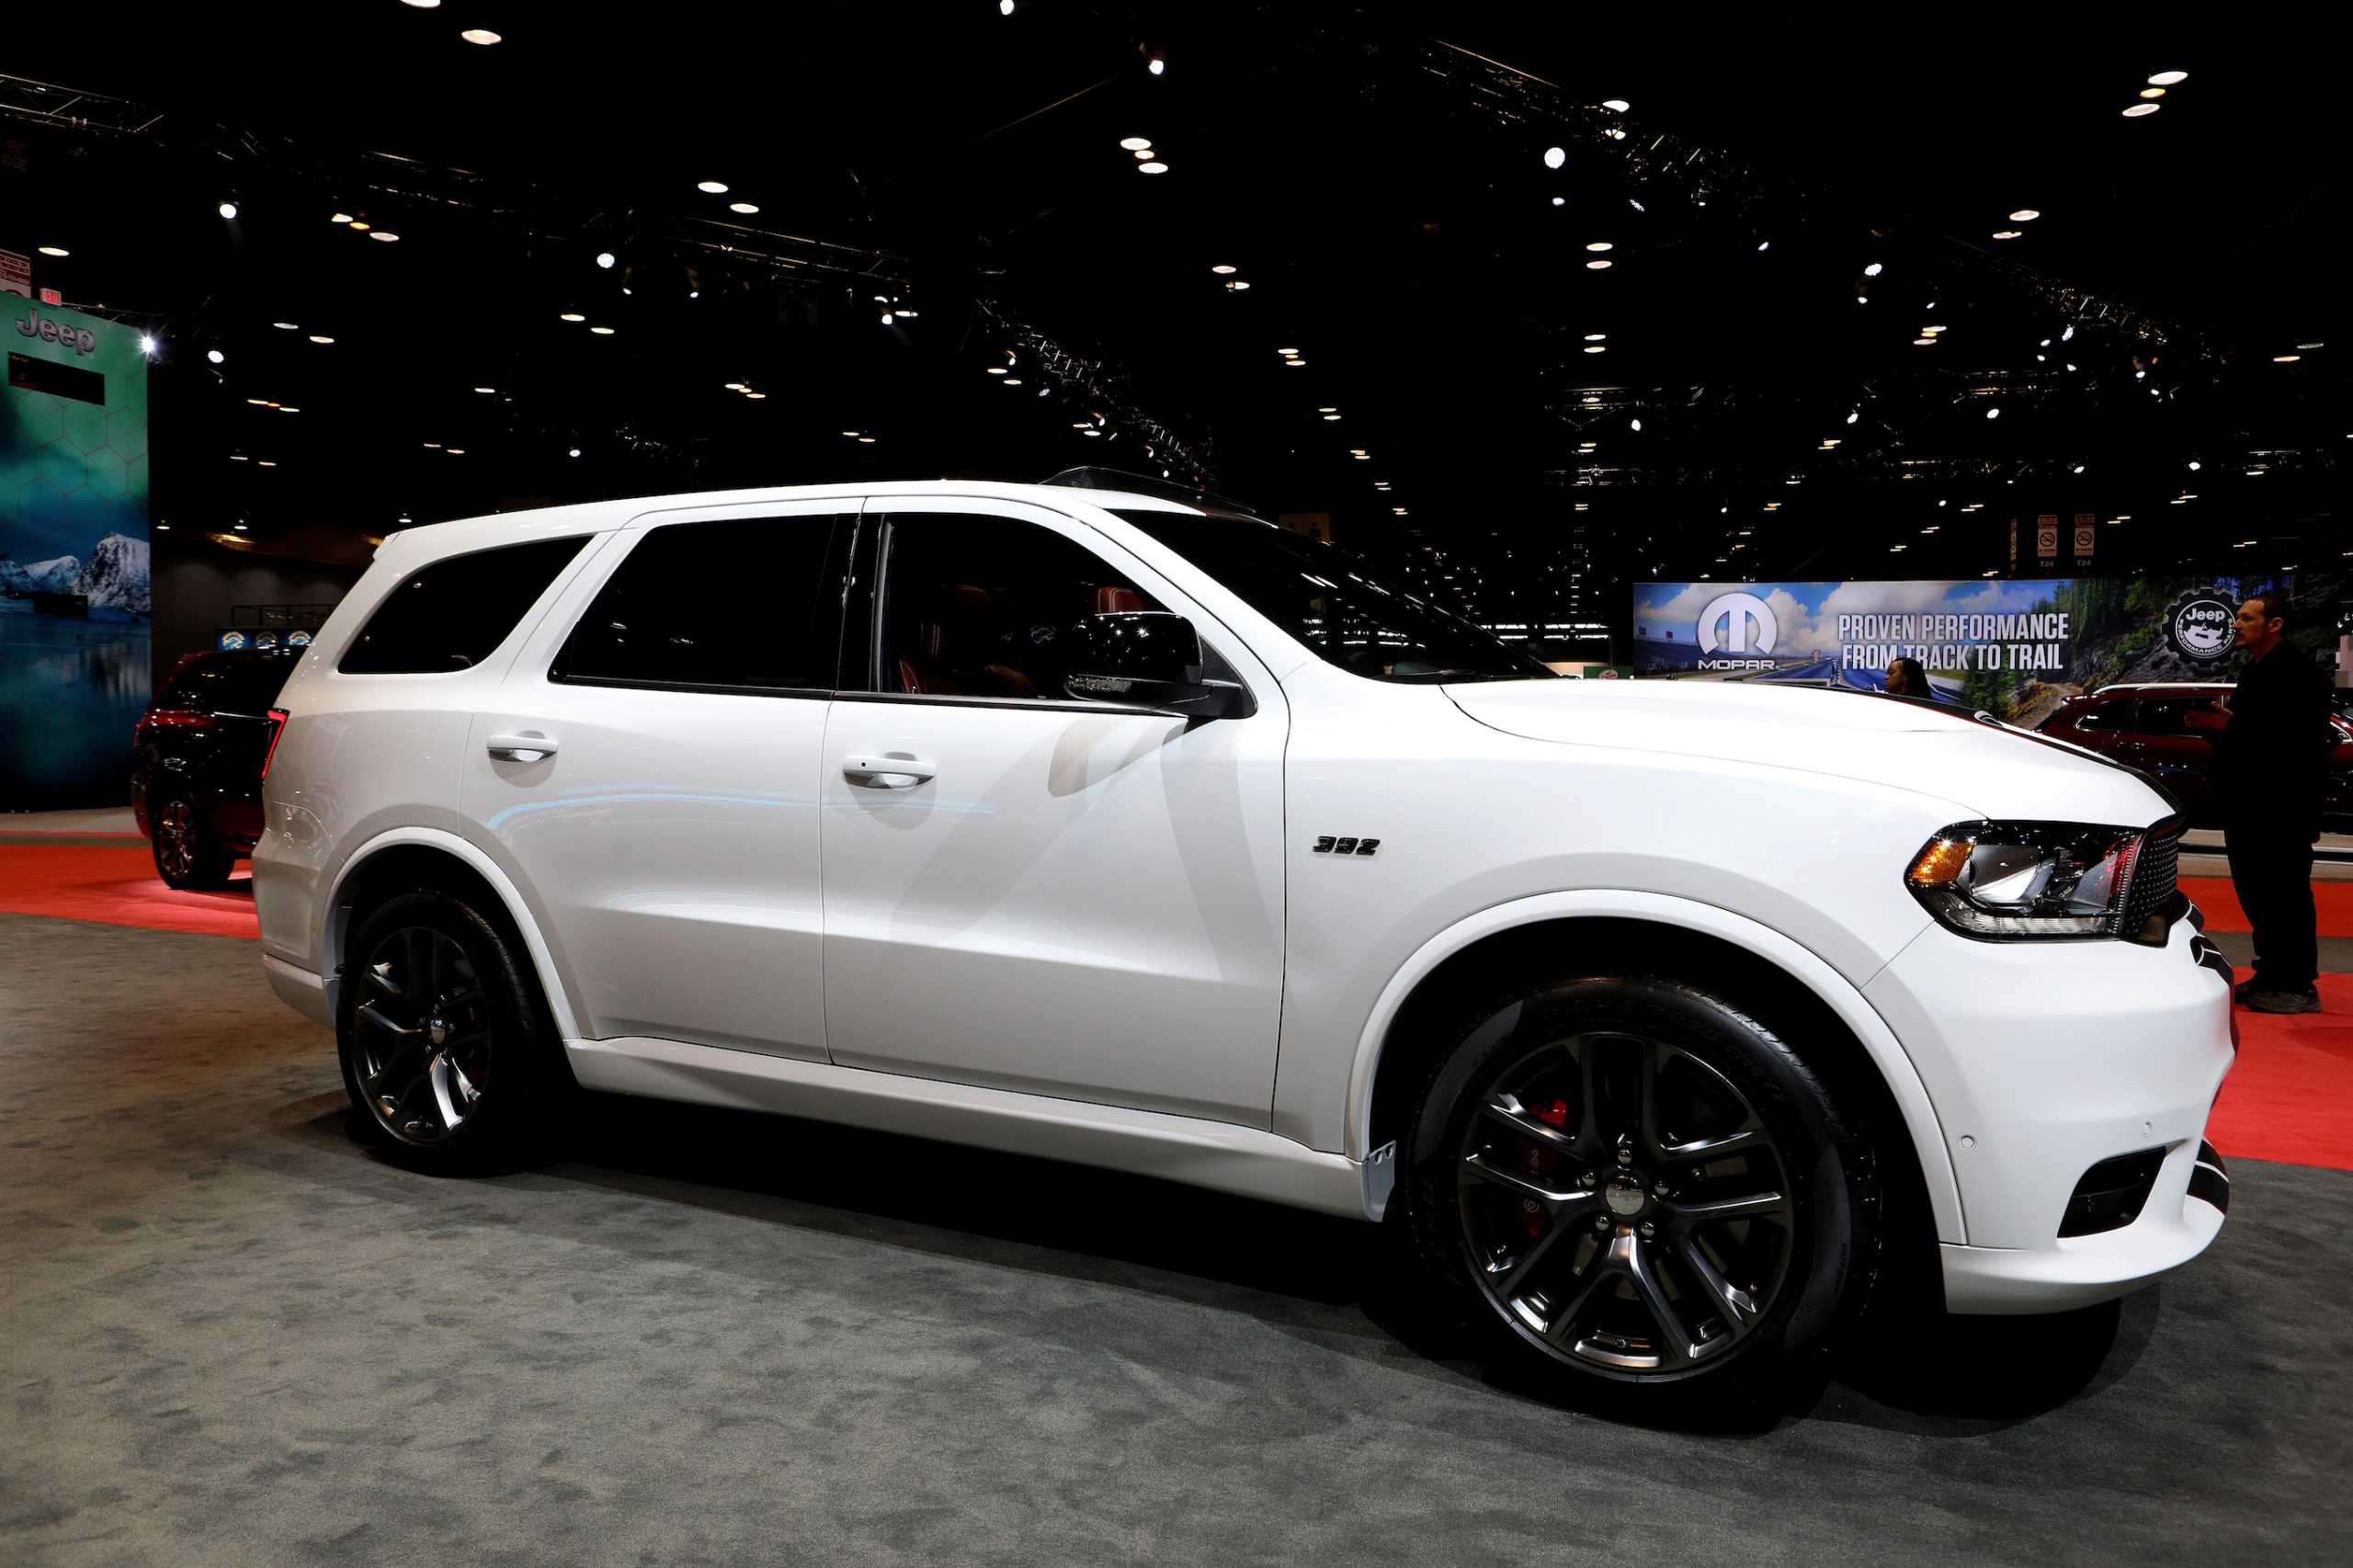 2020 Dodge Durango SRT is on display at the 112th Annual Chicago Auto Show